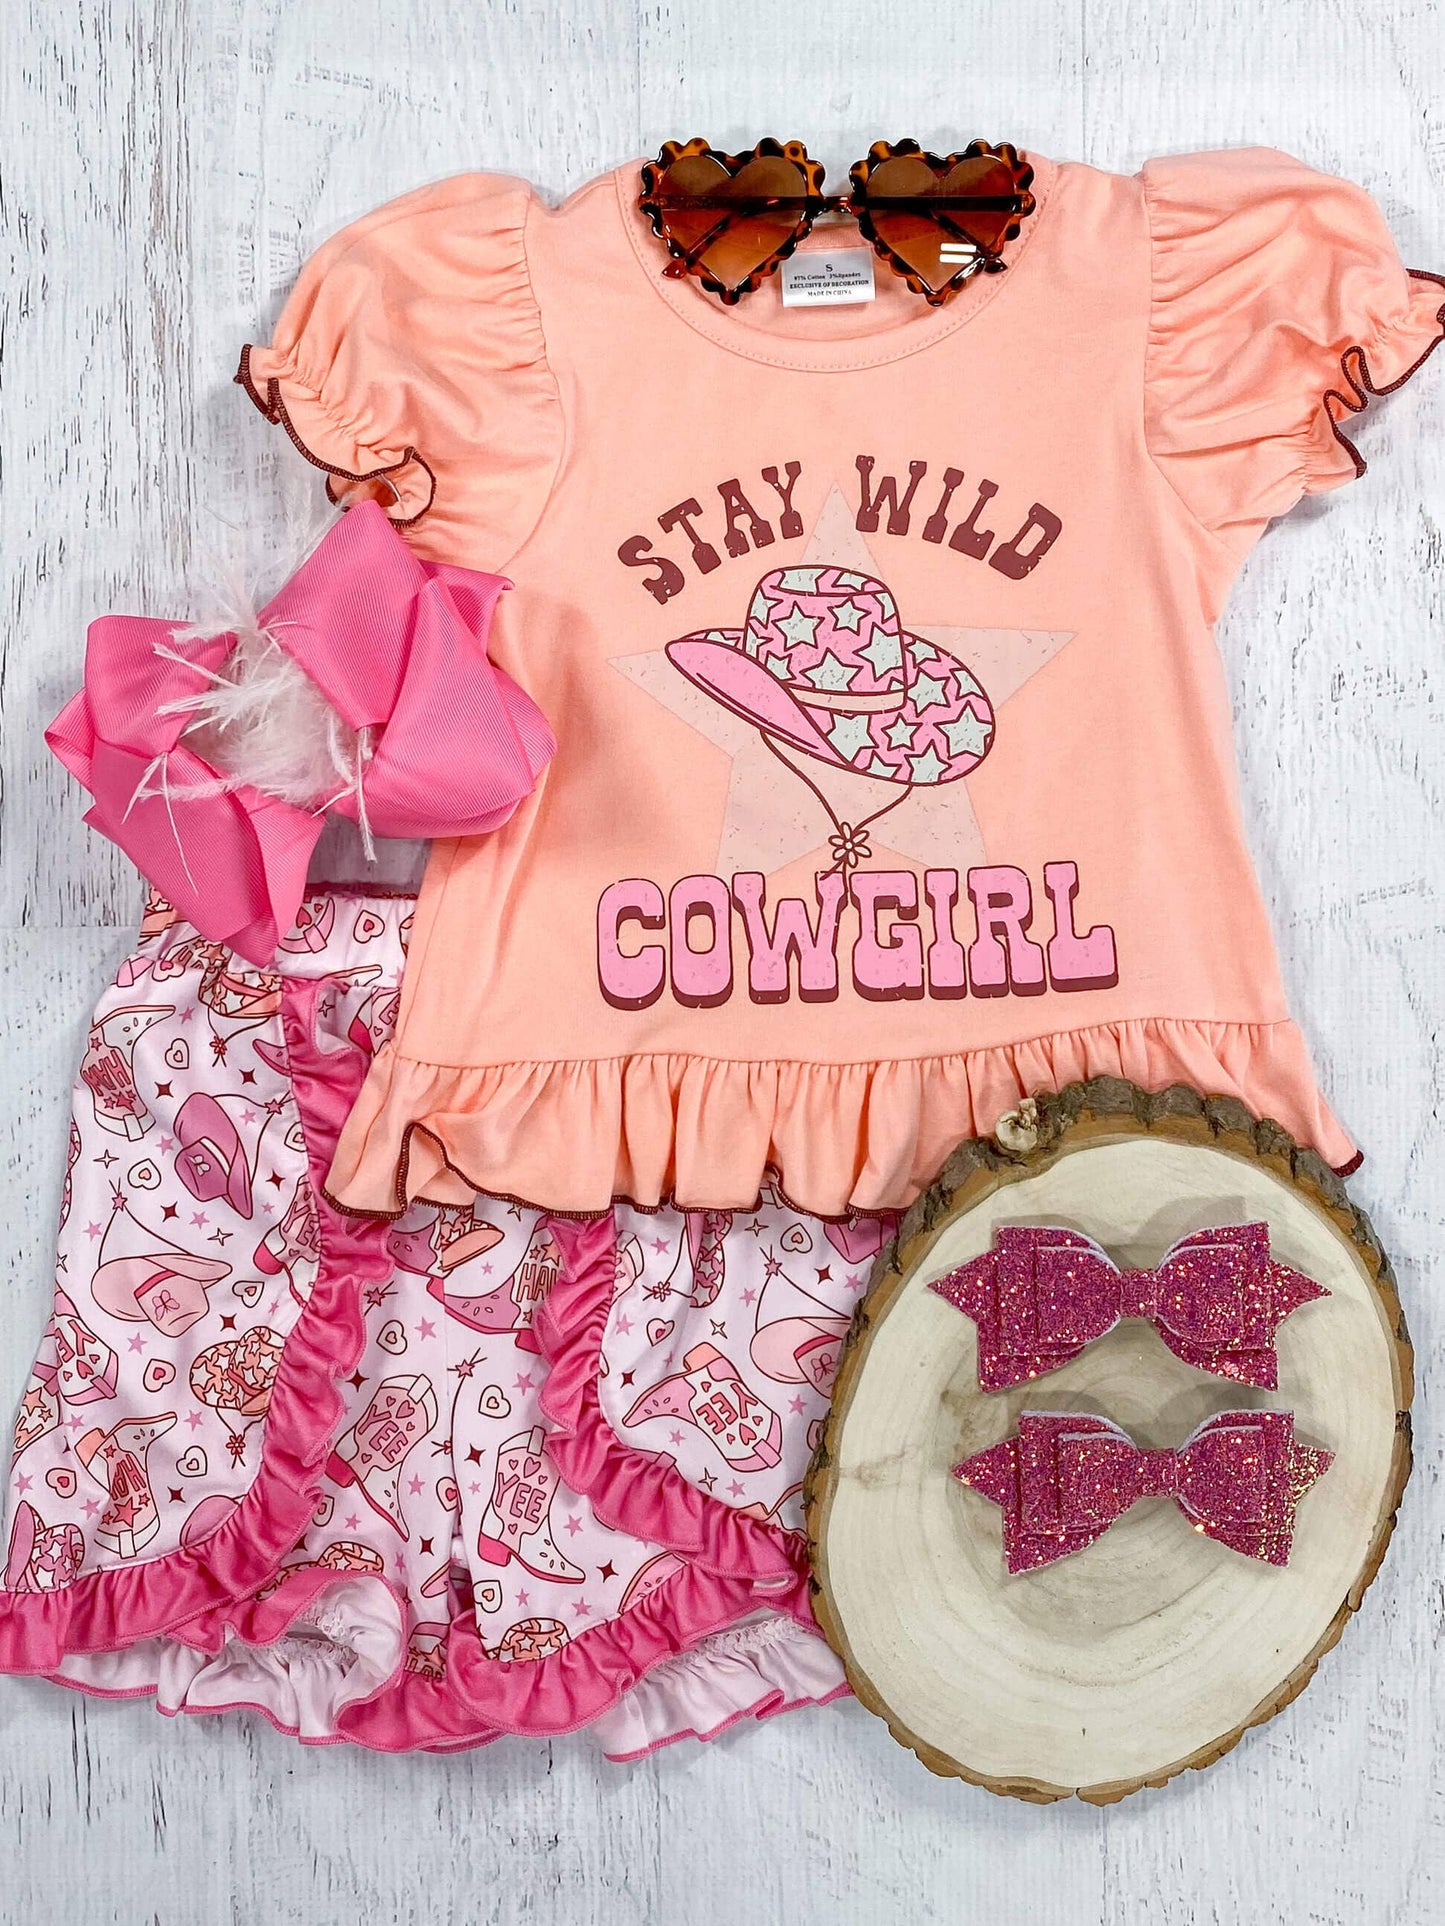 Stay Wild Cowgirl Set